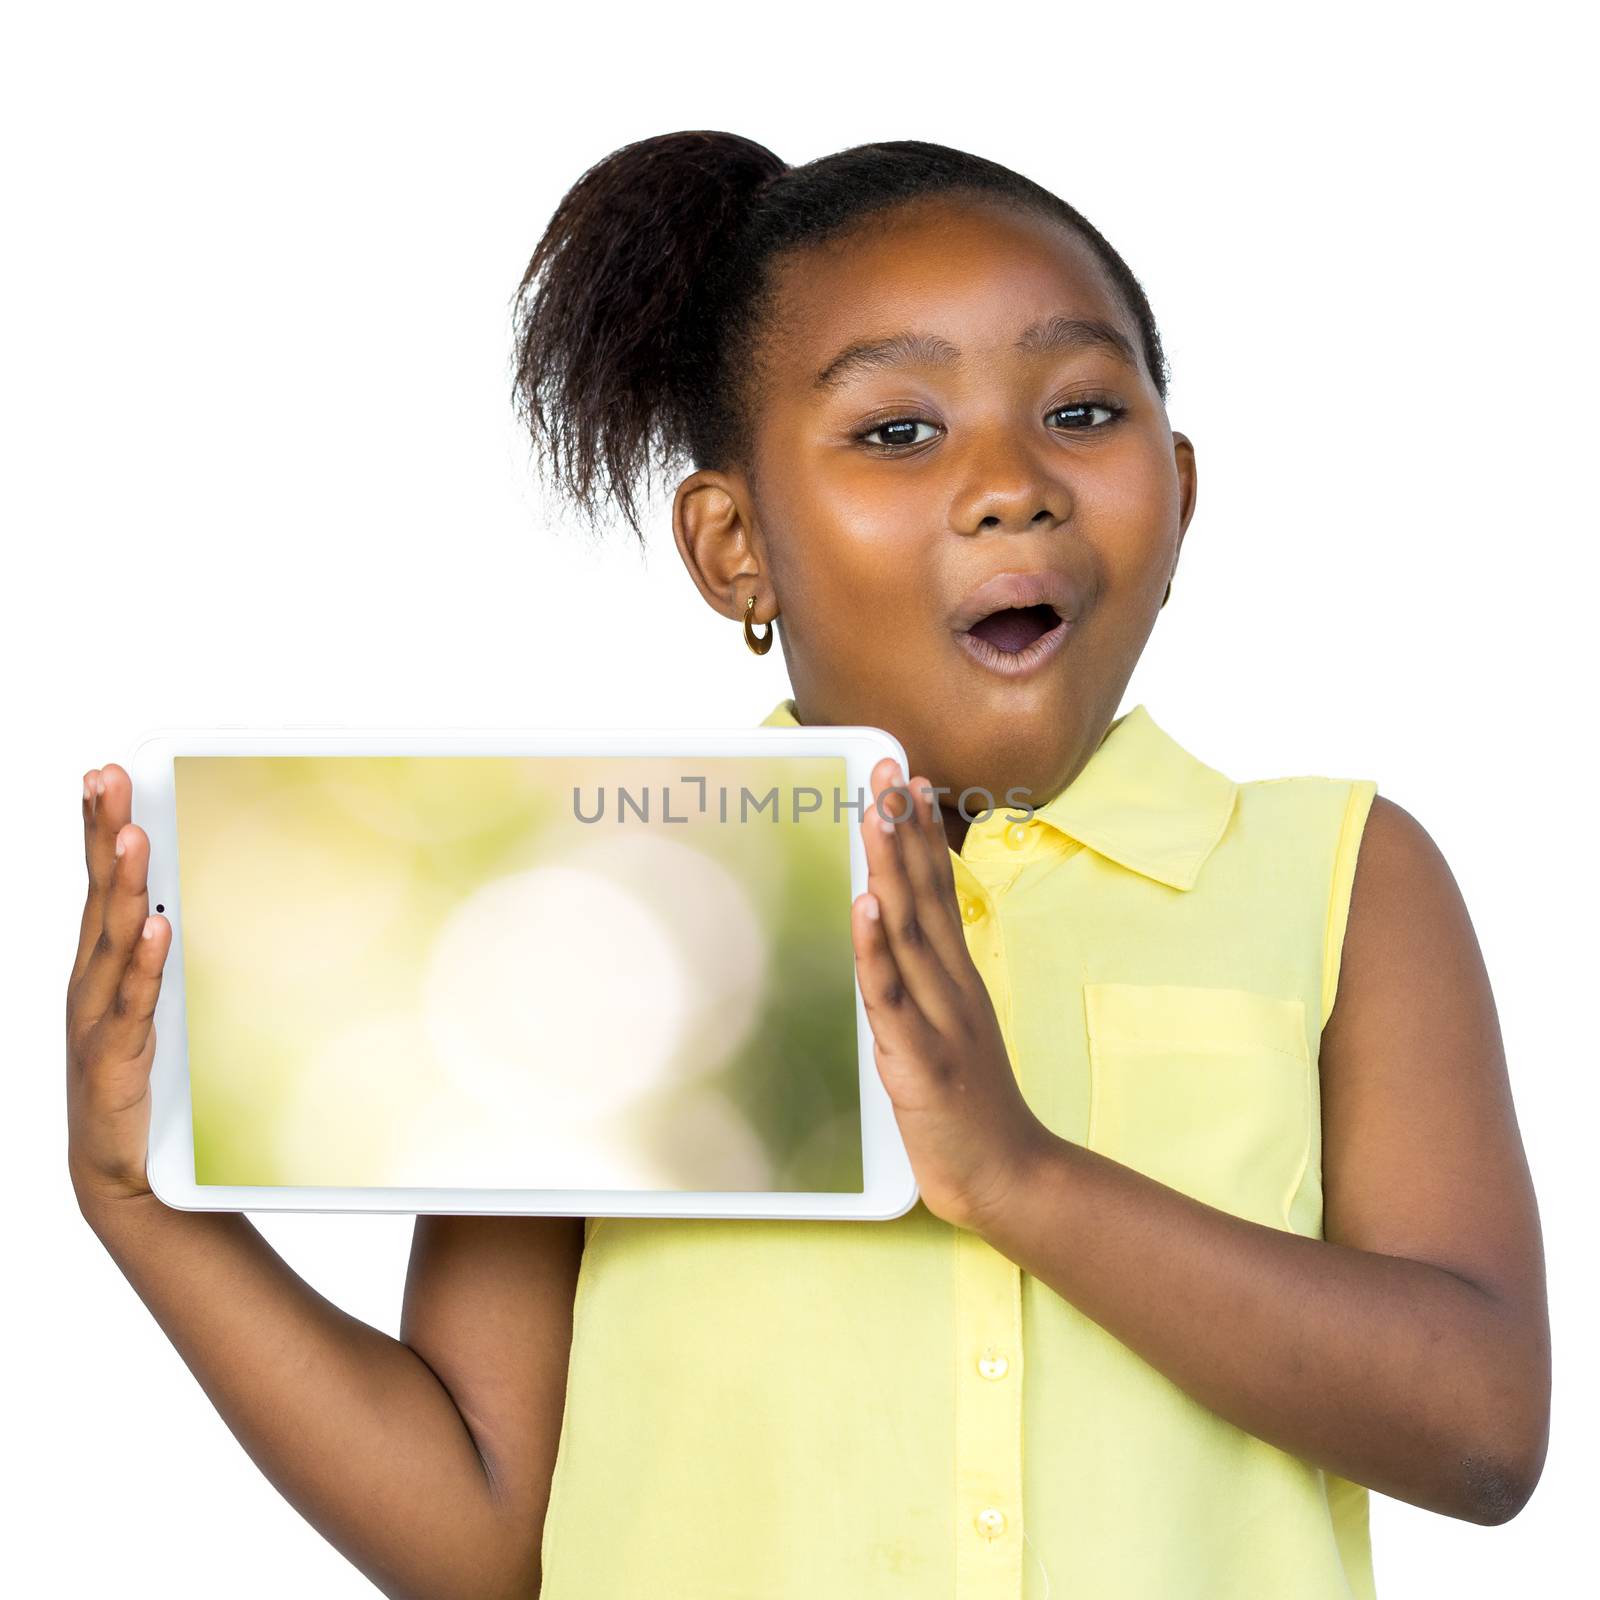 Close up fun portrait of cute little african girl with ponytail holding blank digital tablet. Kid with surprised facial expression isolated on white background.